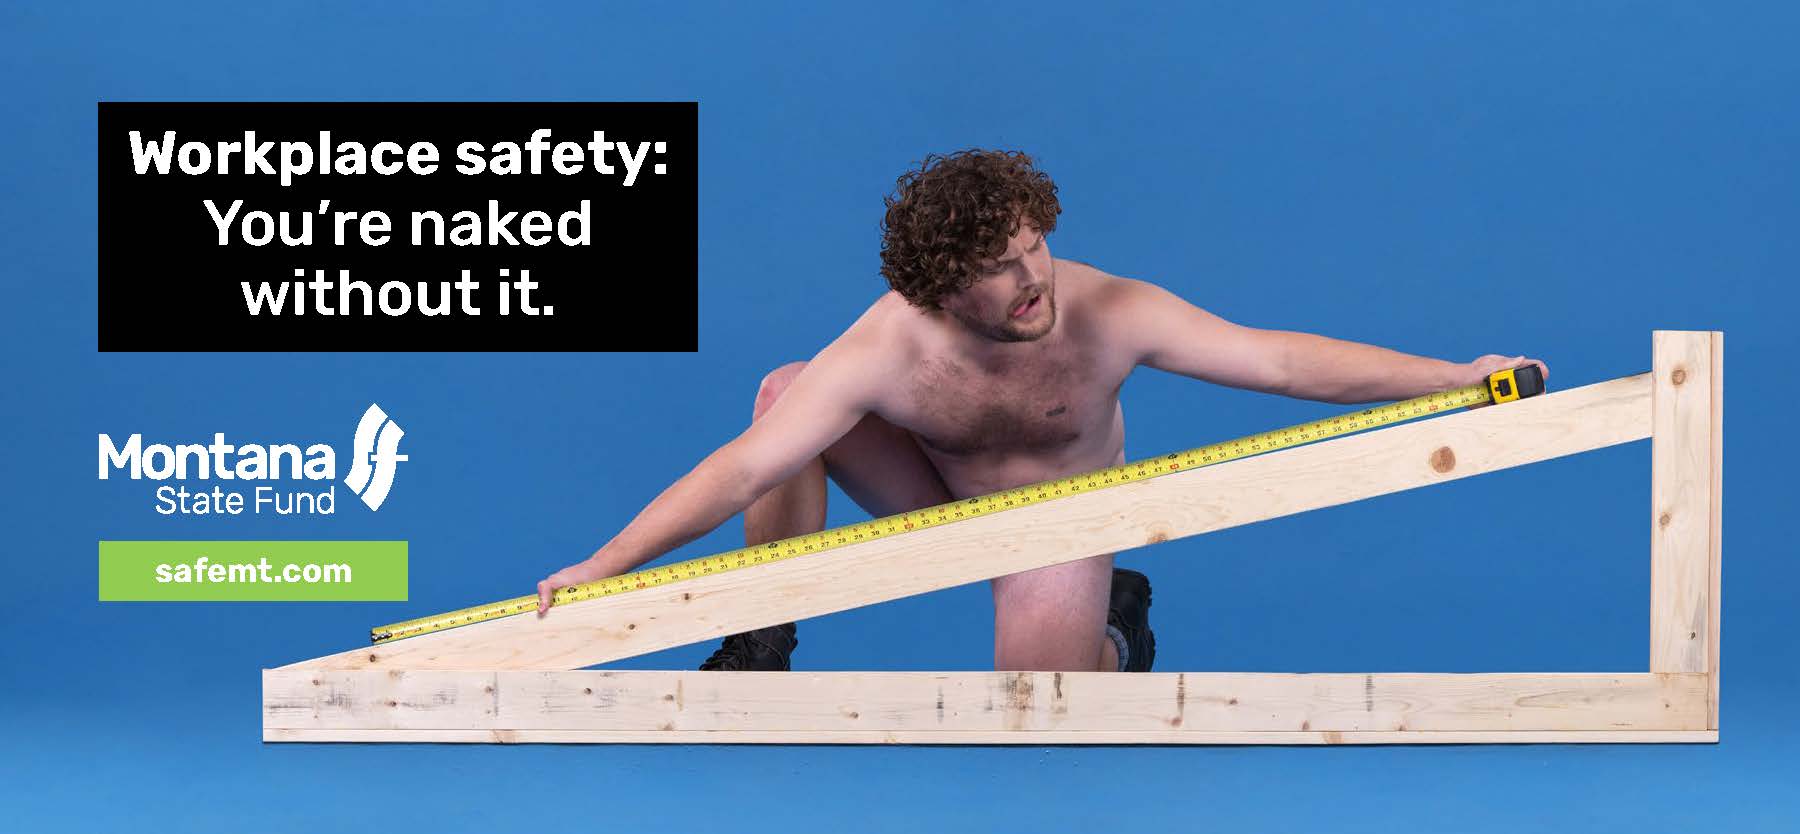 New Advertising Campaign Exposes Montanans to Workplace Safety